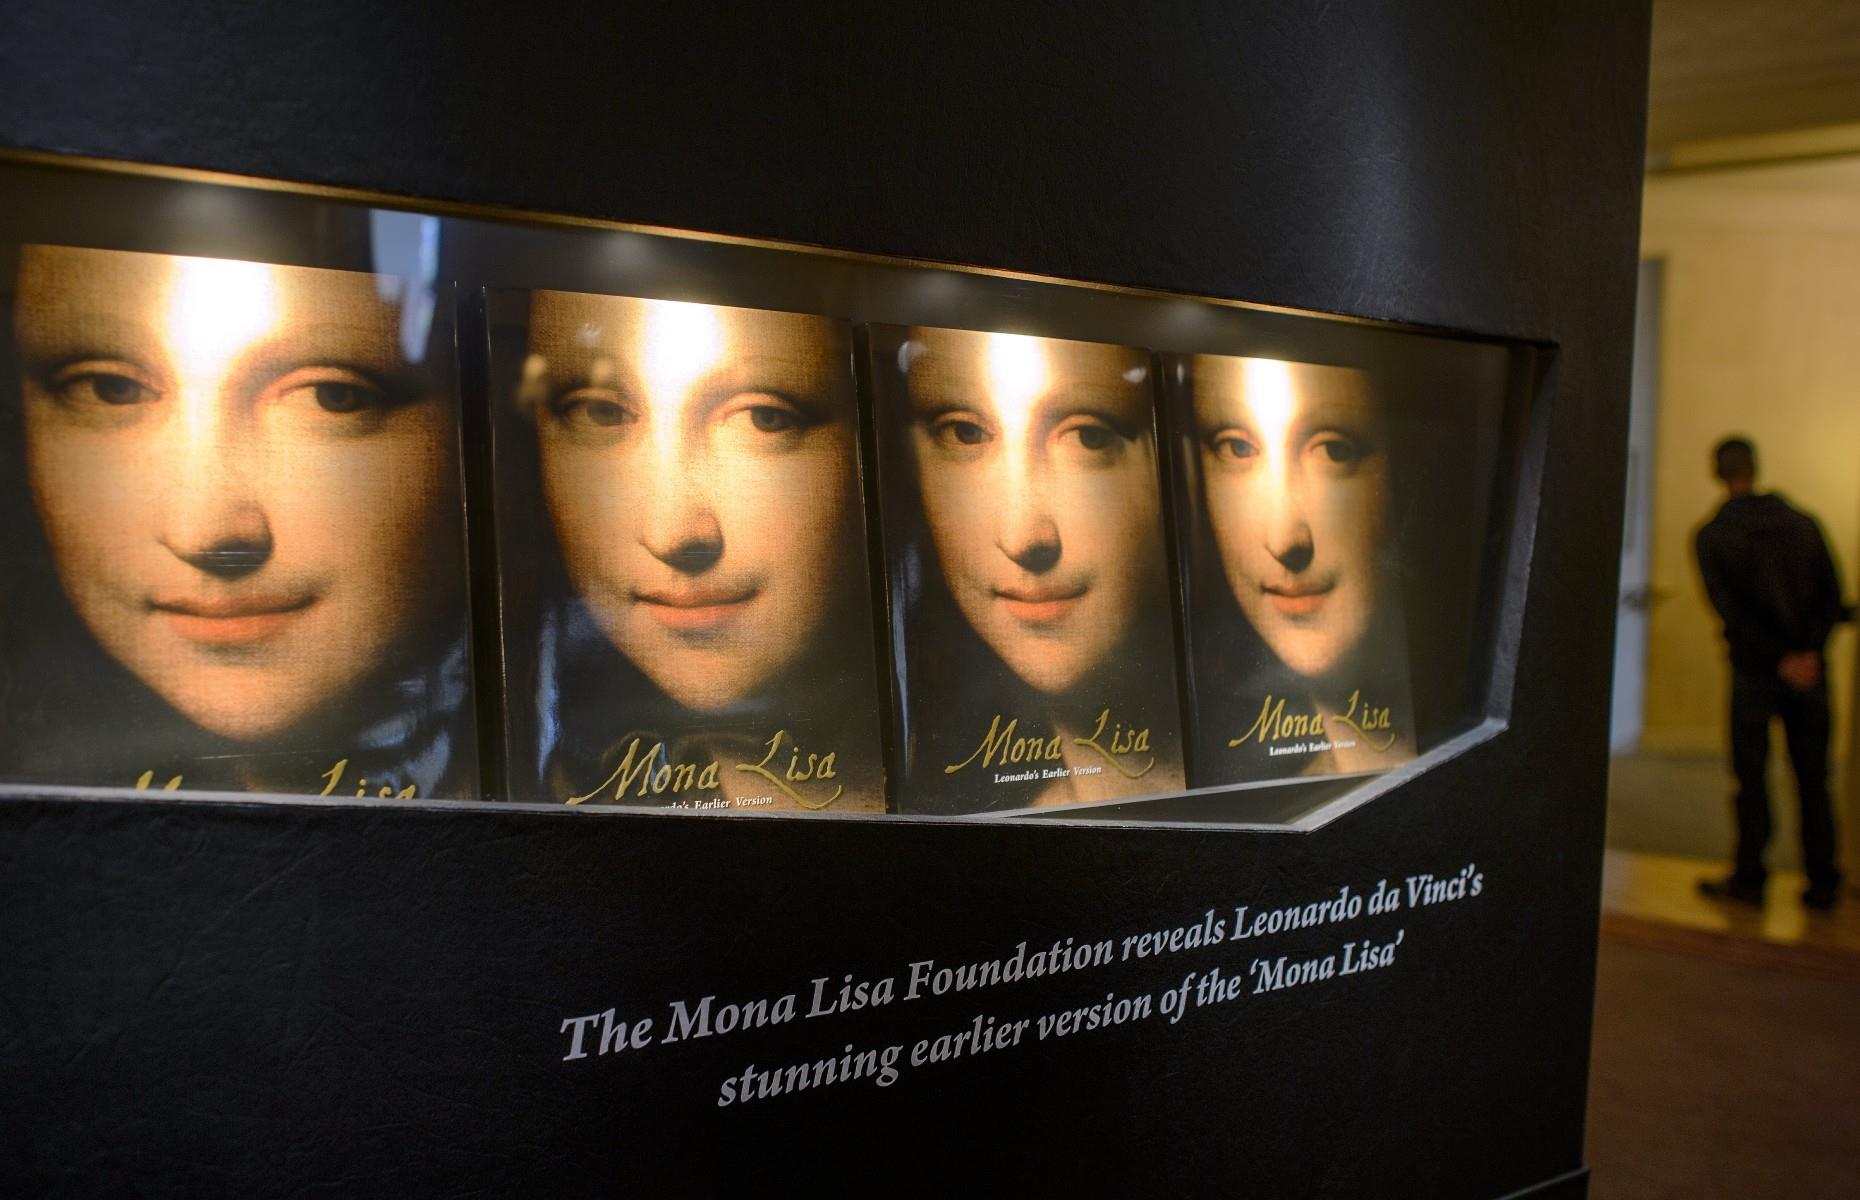 <p>In 2012, an organisation named the Mona Lisa Foundation revealed the painting to the world, claiming it was an earlier version of the <em>Mona Lisa</em> painted by da Vinci himself. Over the years the foundation has presented independent evidence of the painting’s legitimacy, however scholars and experts can't agree on whether not the painting is a true da Vinci. When questioned, the foundation claimed that it did not own the painting and that the painting was owned by an unnamed international consortium. </p>